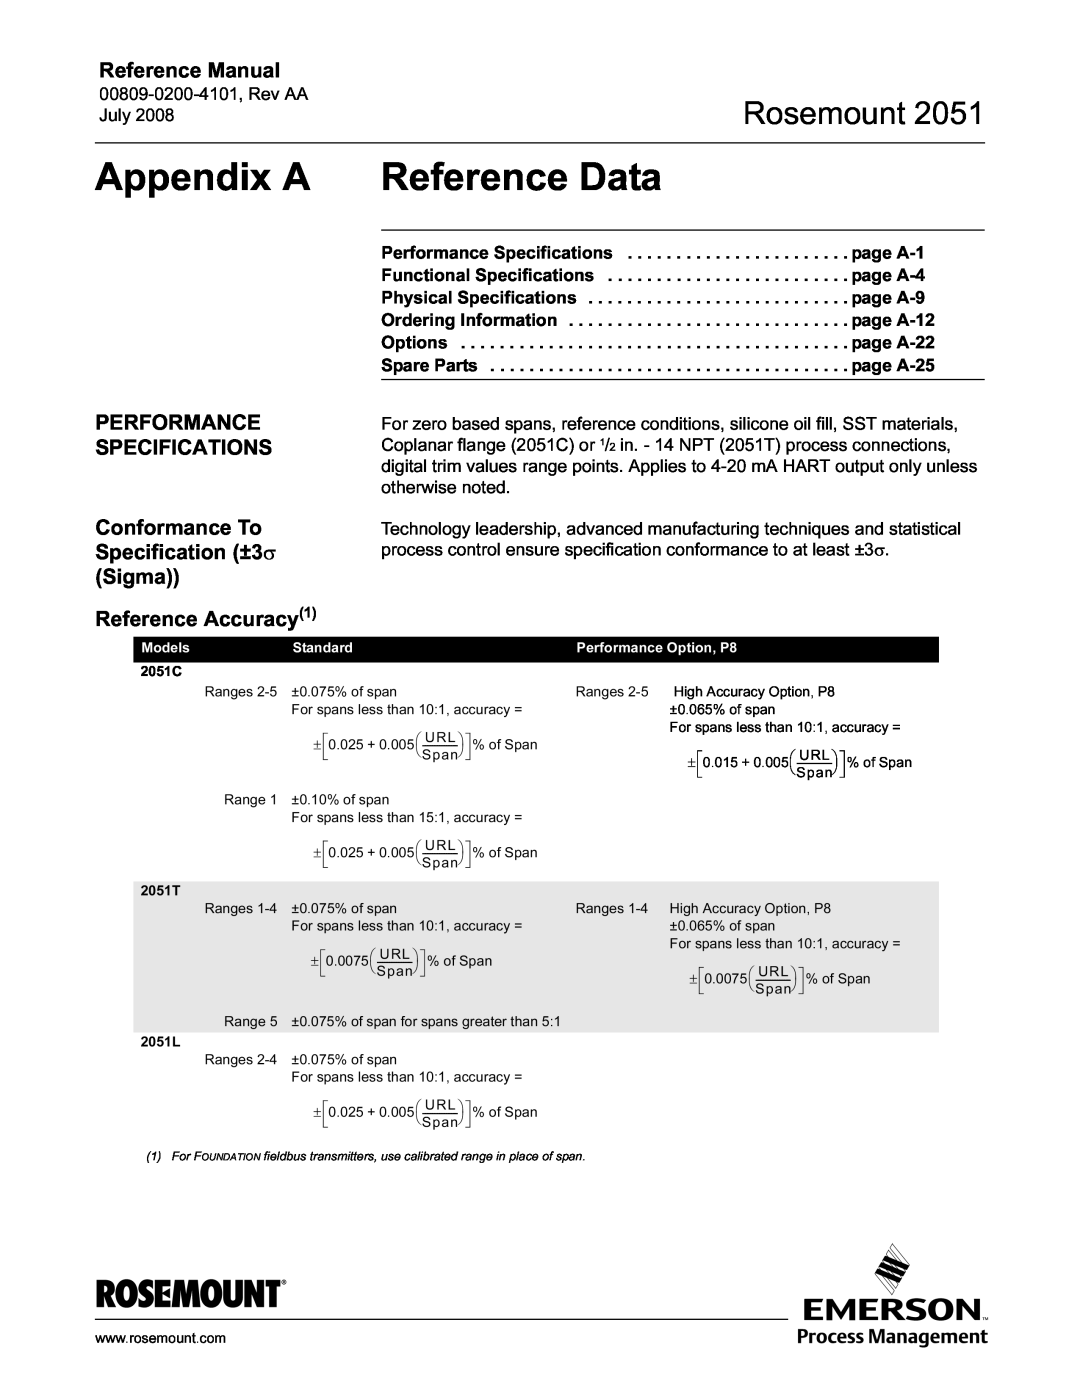 Emerson Process Management 2051 Appendix A, Reference Data, Performance Specifications, Reference Accuracy1, Rosemount 